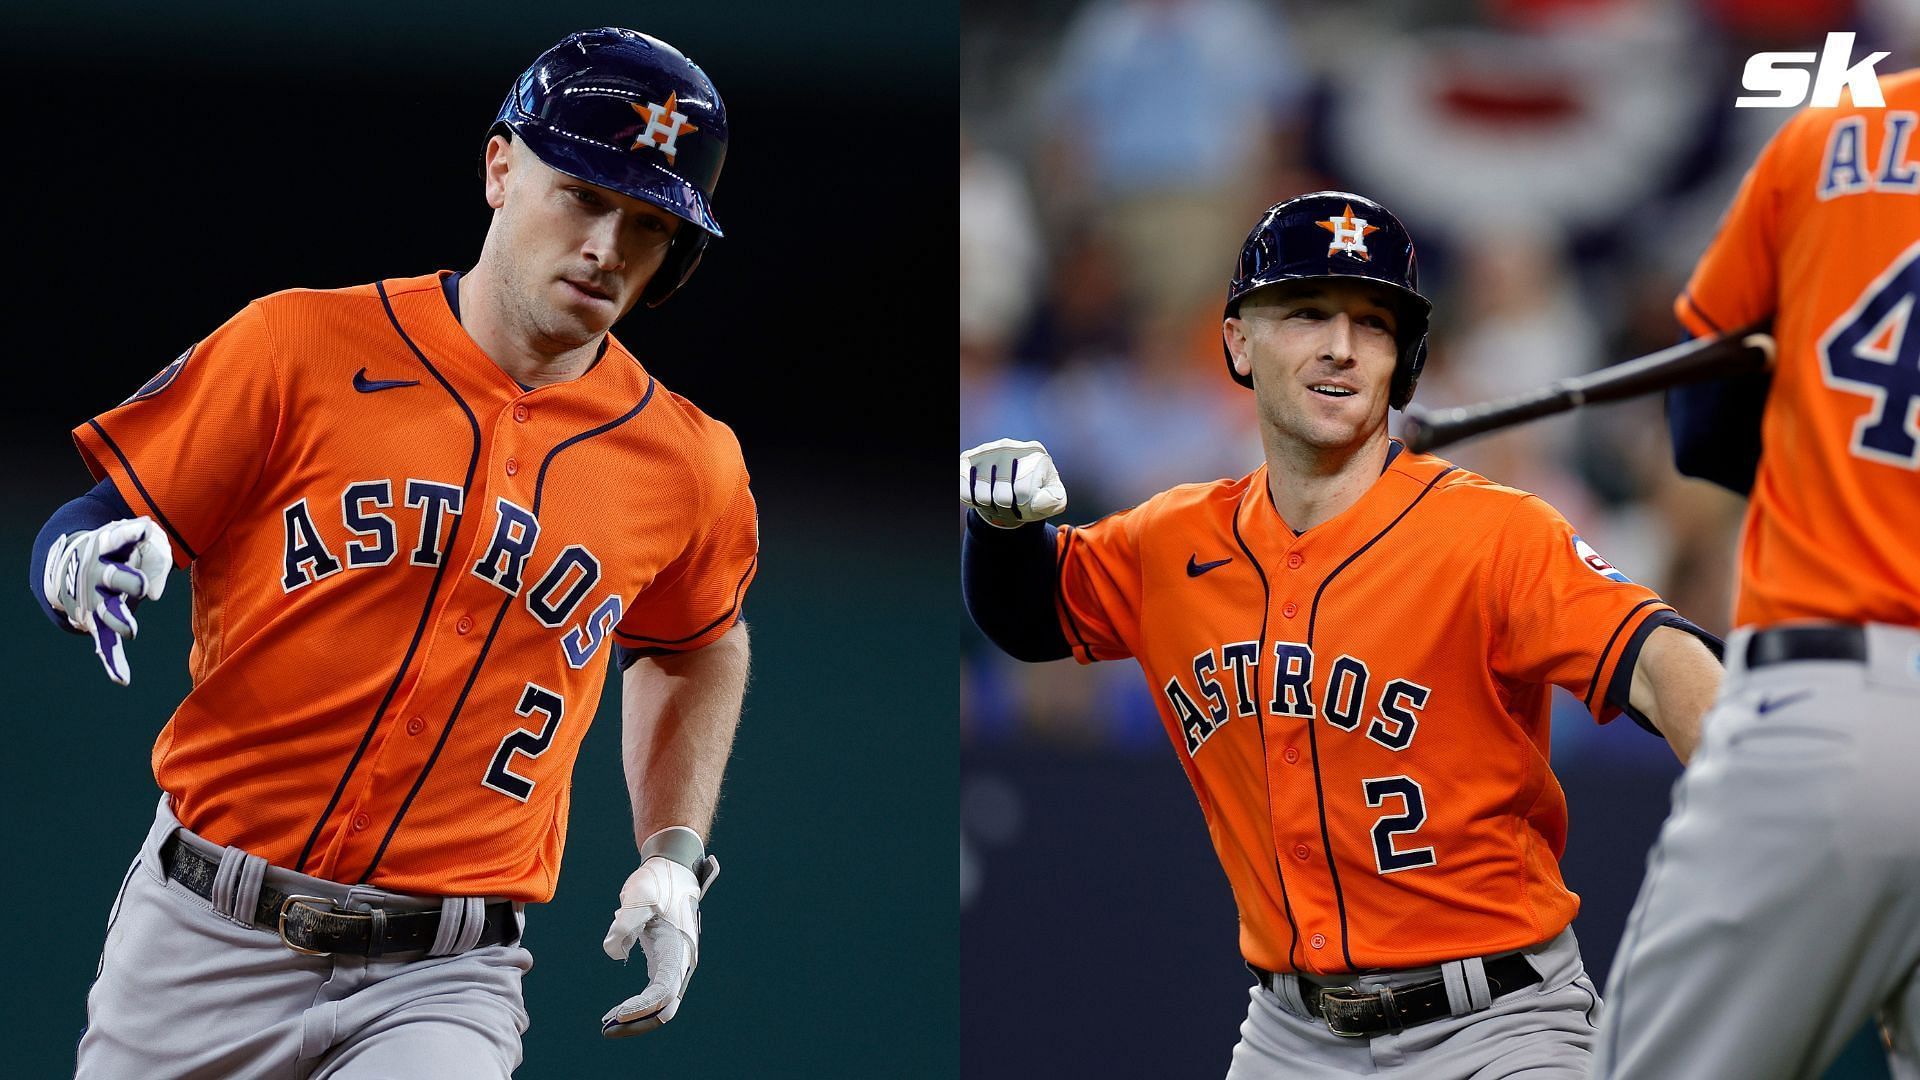 Alex Bregman opened Game 5 of the ALCS with a bang